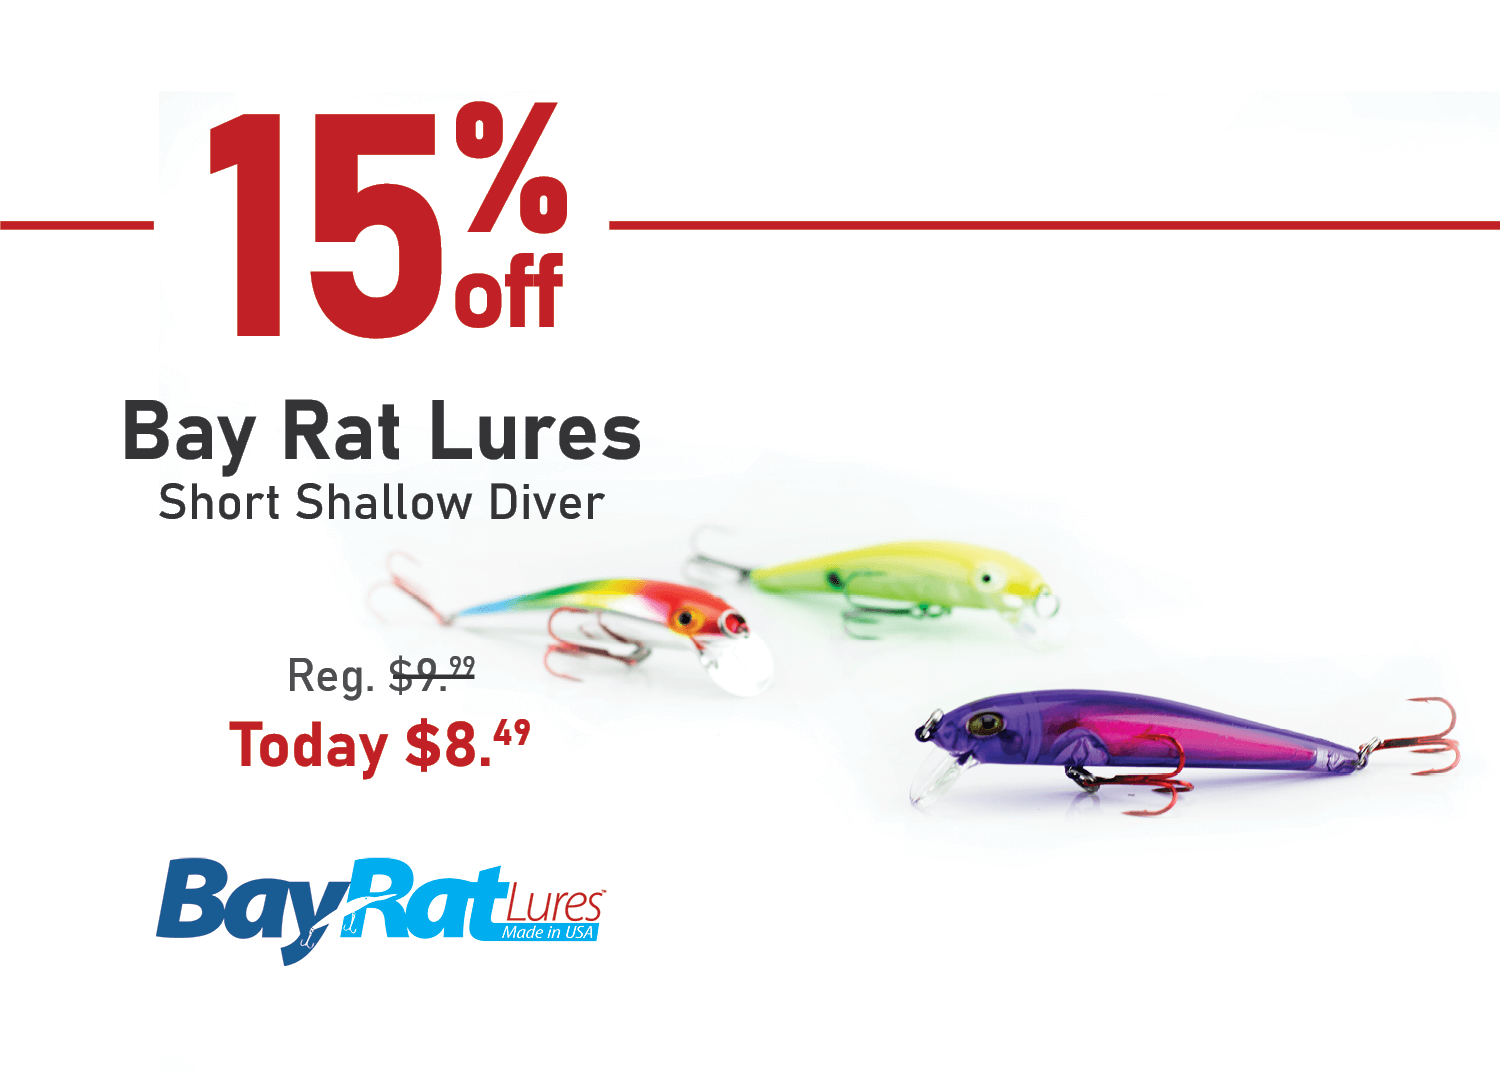 Save 15% on the Bay Rat Lures Short Shallow Diver